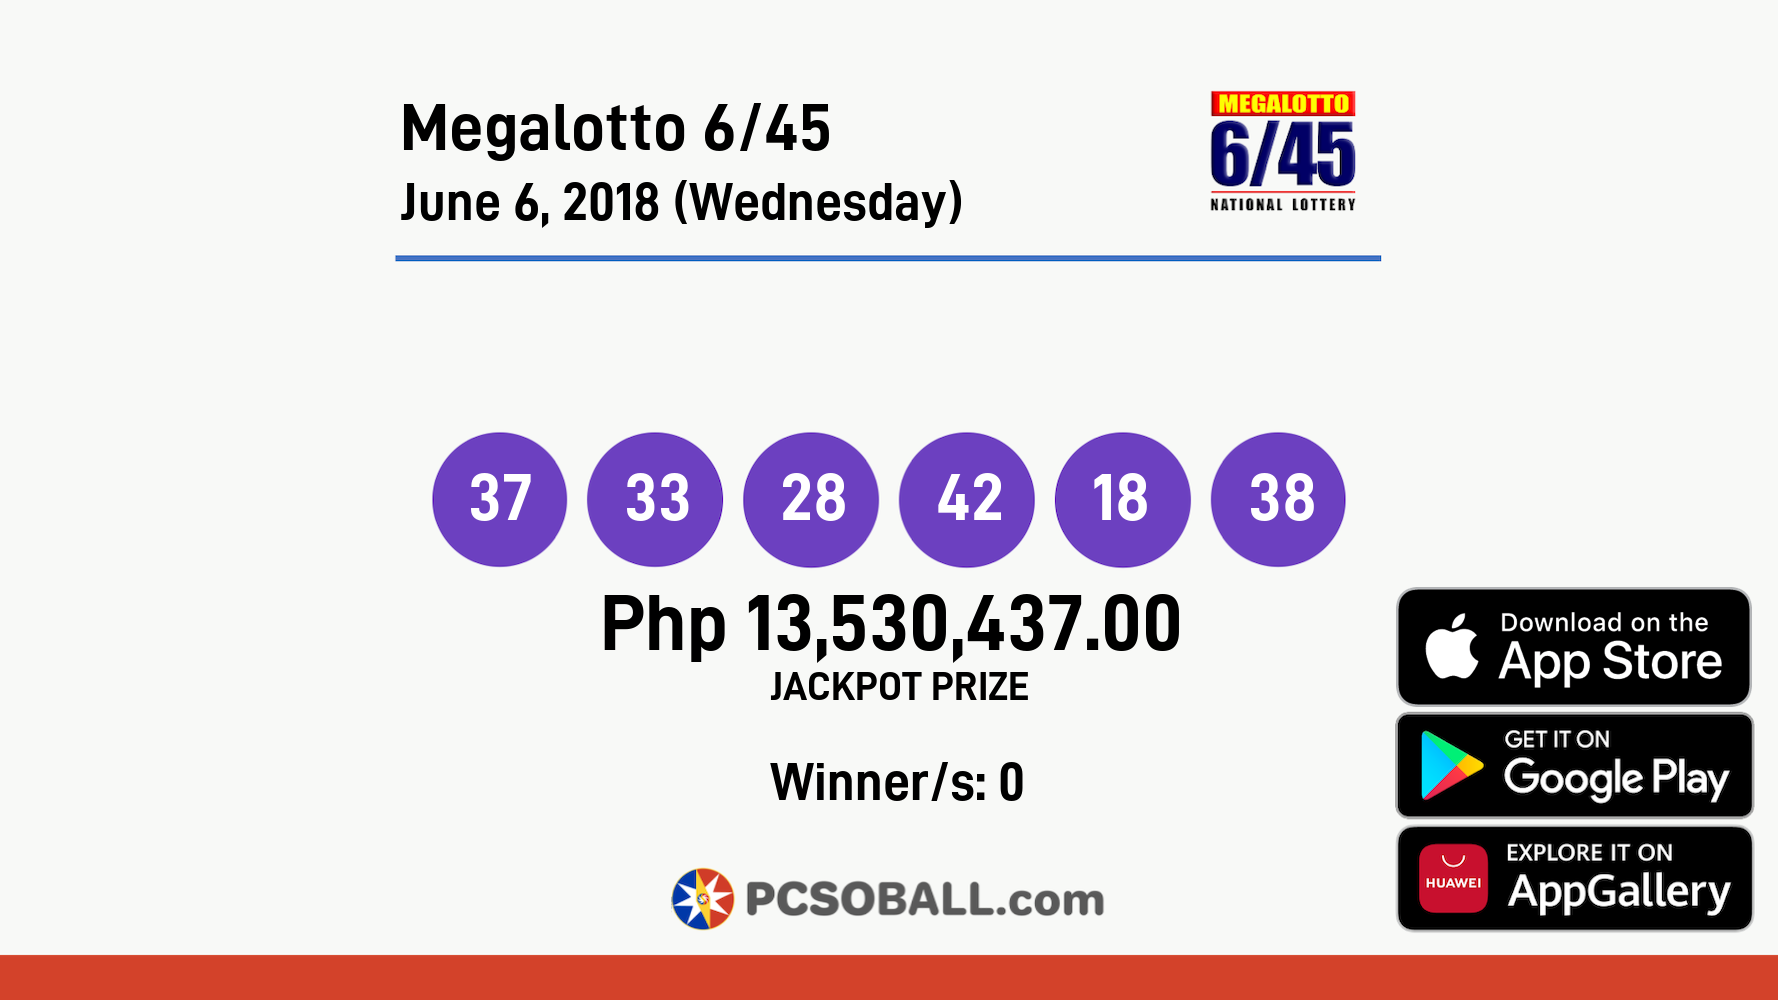 Megalotto 6/45 June 6, 2018 (Wednesday) Result